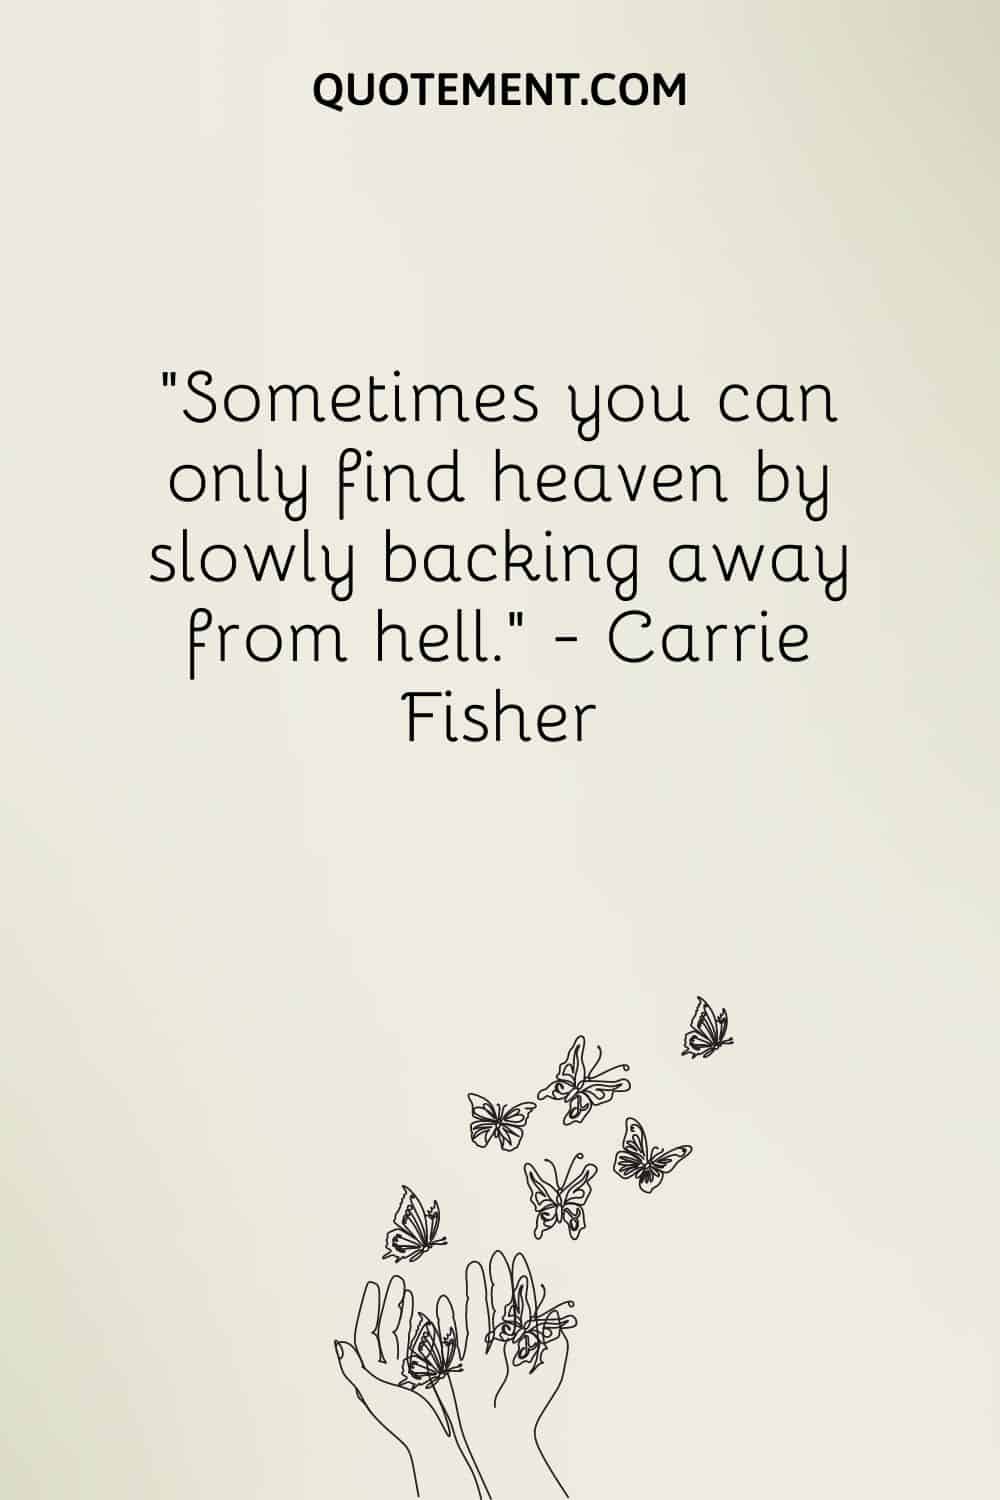 Sometimes you can only find heaven by slowly backing away from hell